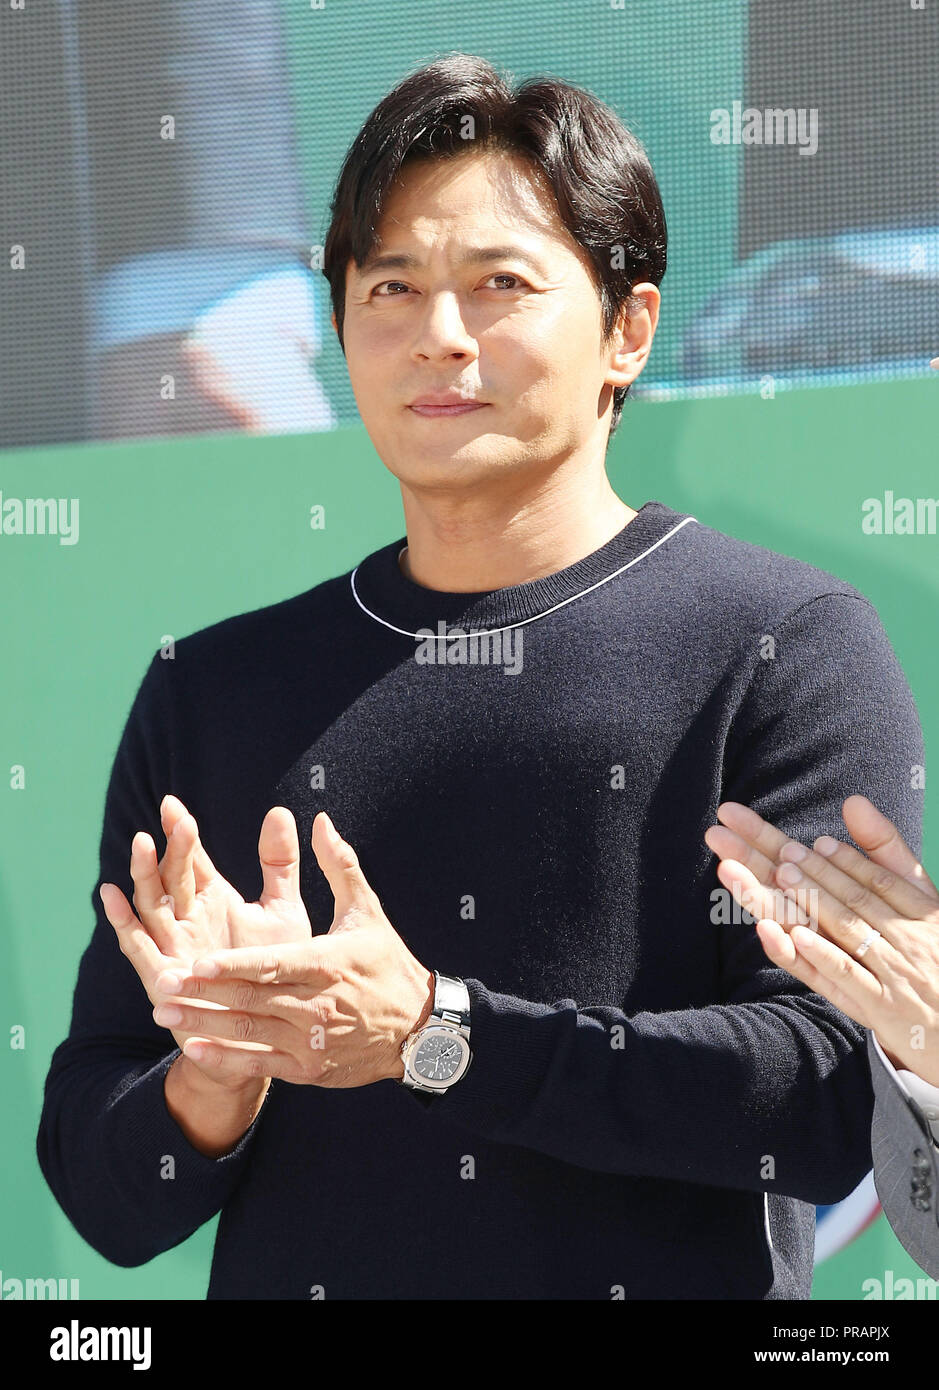 01st Oct, 2018. S. Korean actor Jang Dong-gun South Korean actor Jang Dong-gun attends the 5th Handon Day at Seoul Land in Gwacheon, Gyeonggi Province, just south of Seoul, on Sept. 29, 2018. Credit: Yonhap/Newcom/Alamy Live News Stock Photo